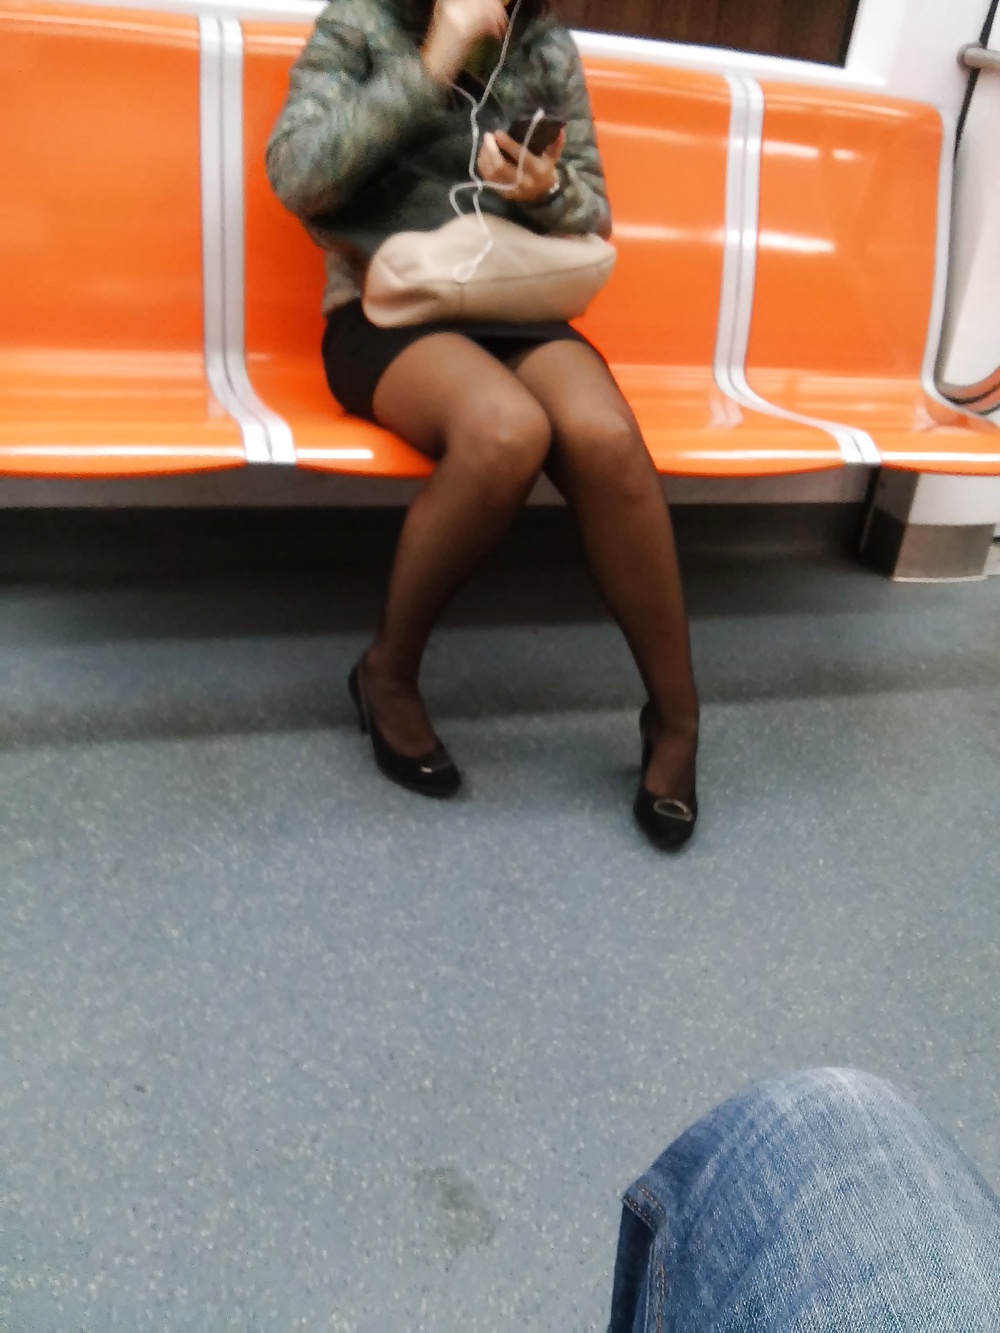 Italian (MILF) woman photographed in the subway (Italy) #31927676